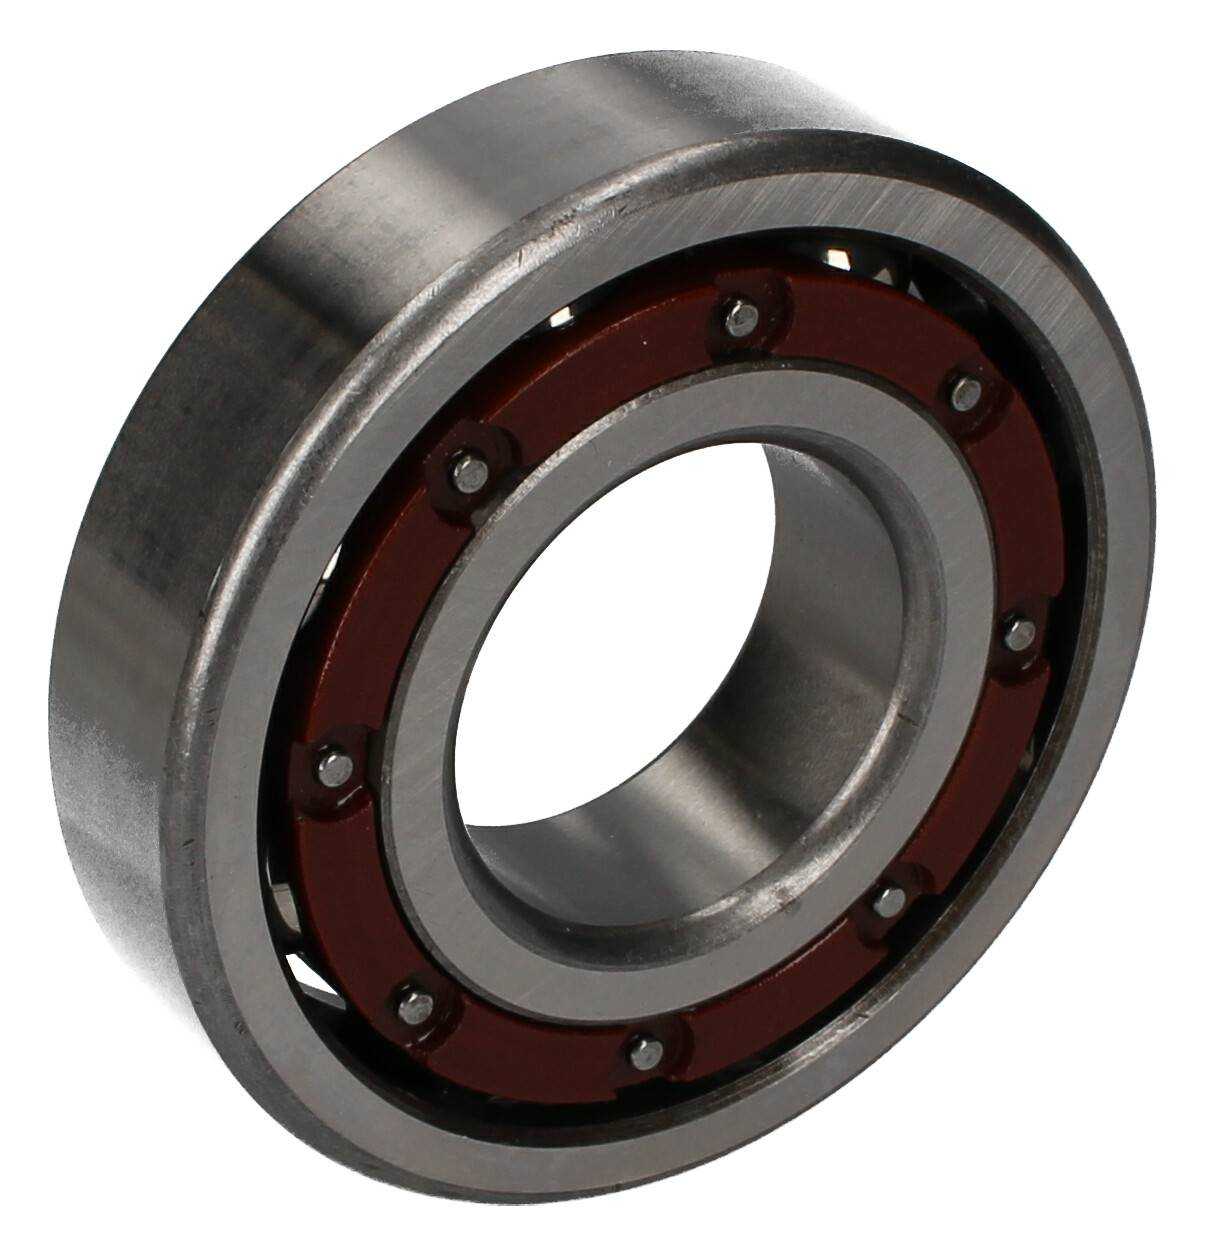 HIGH SPEED BALL BEARING 6213 TB P6 FAG (WITHOUT PACKAGING) - Image 1